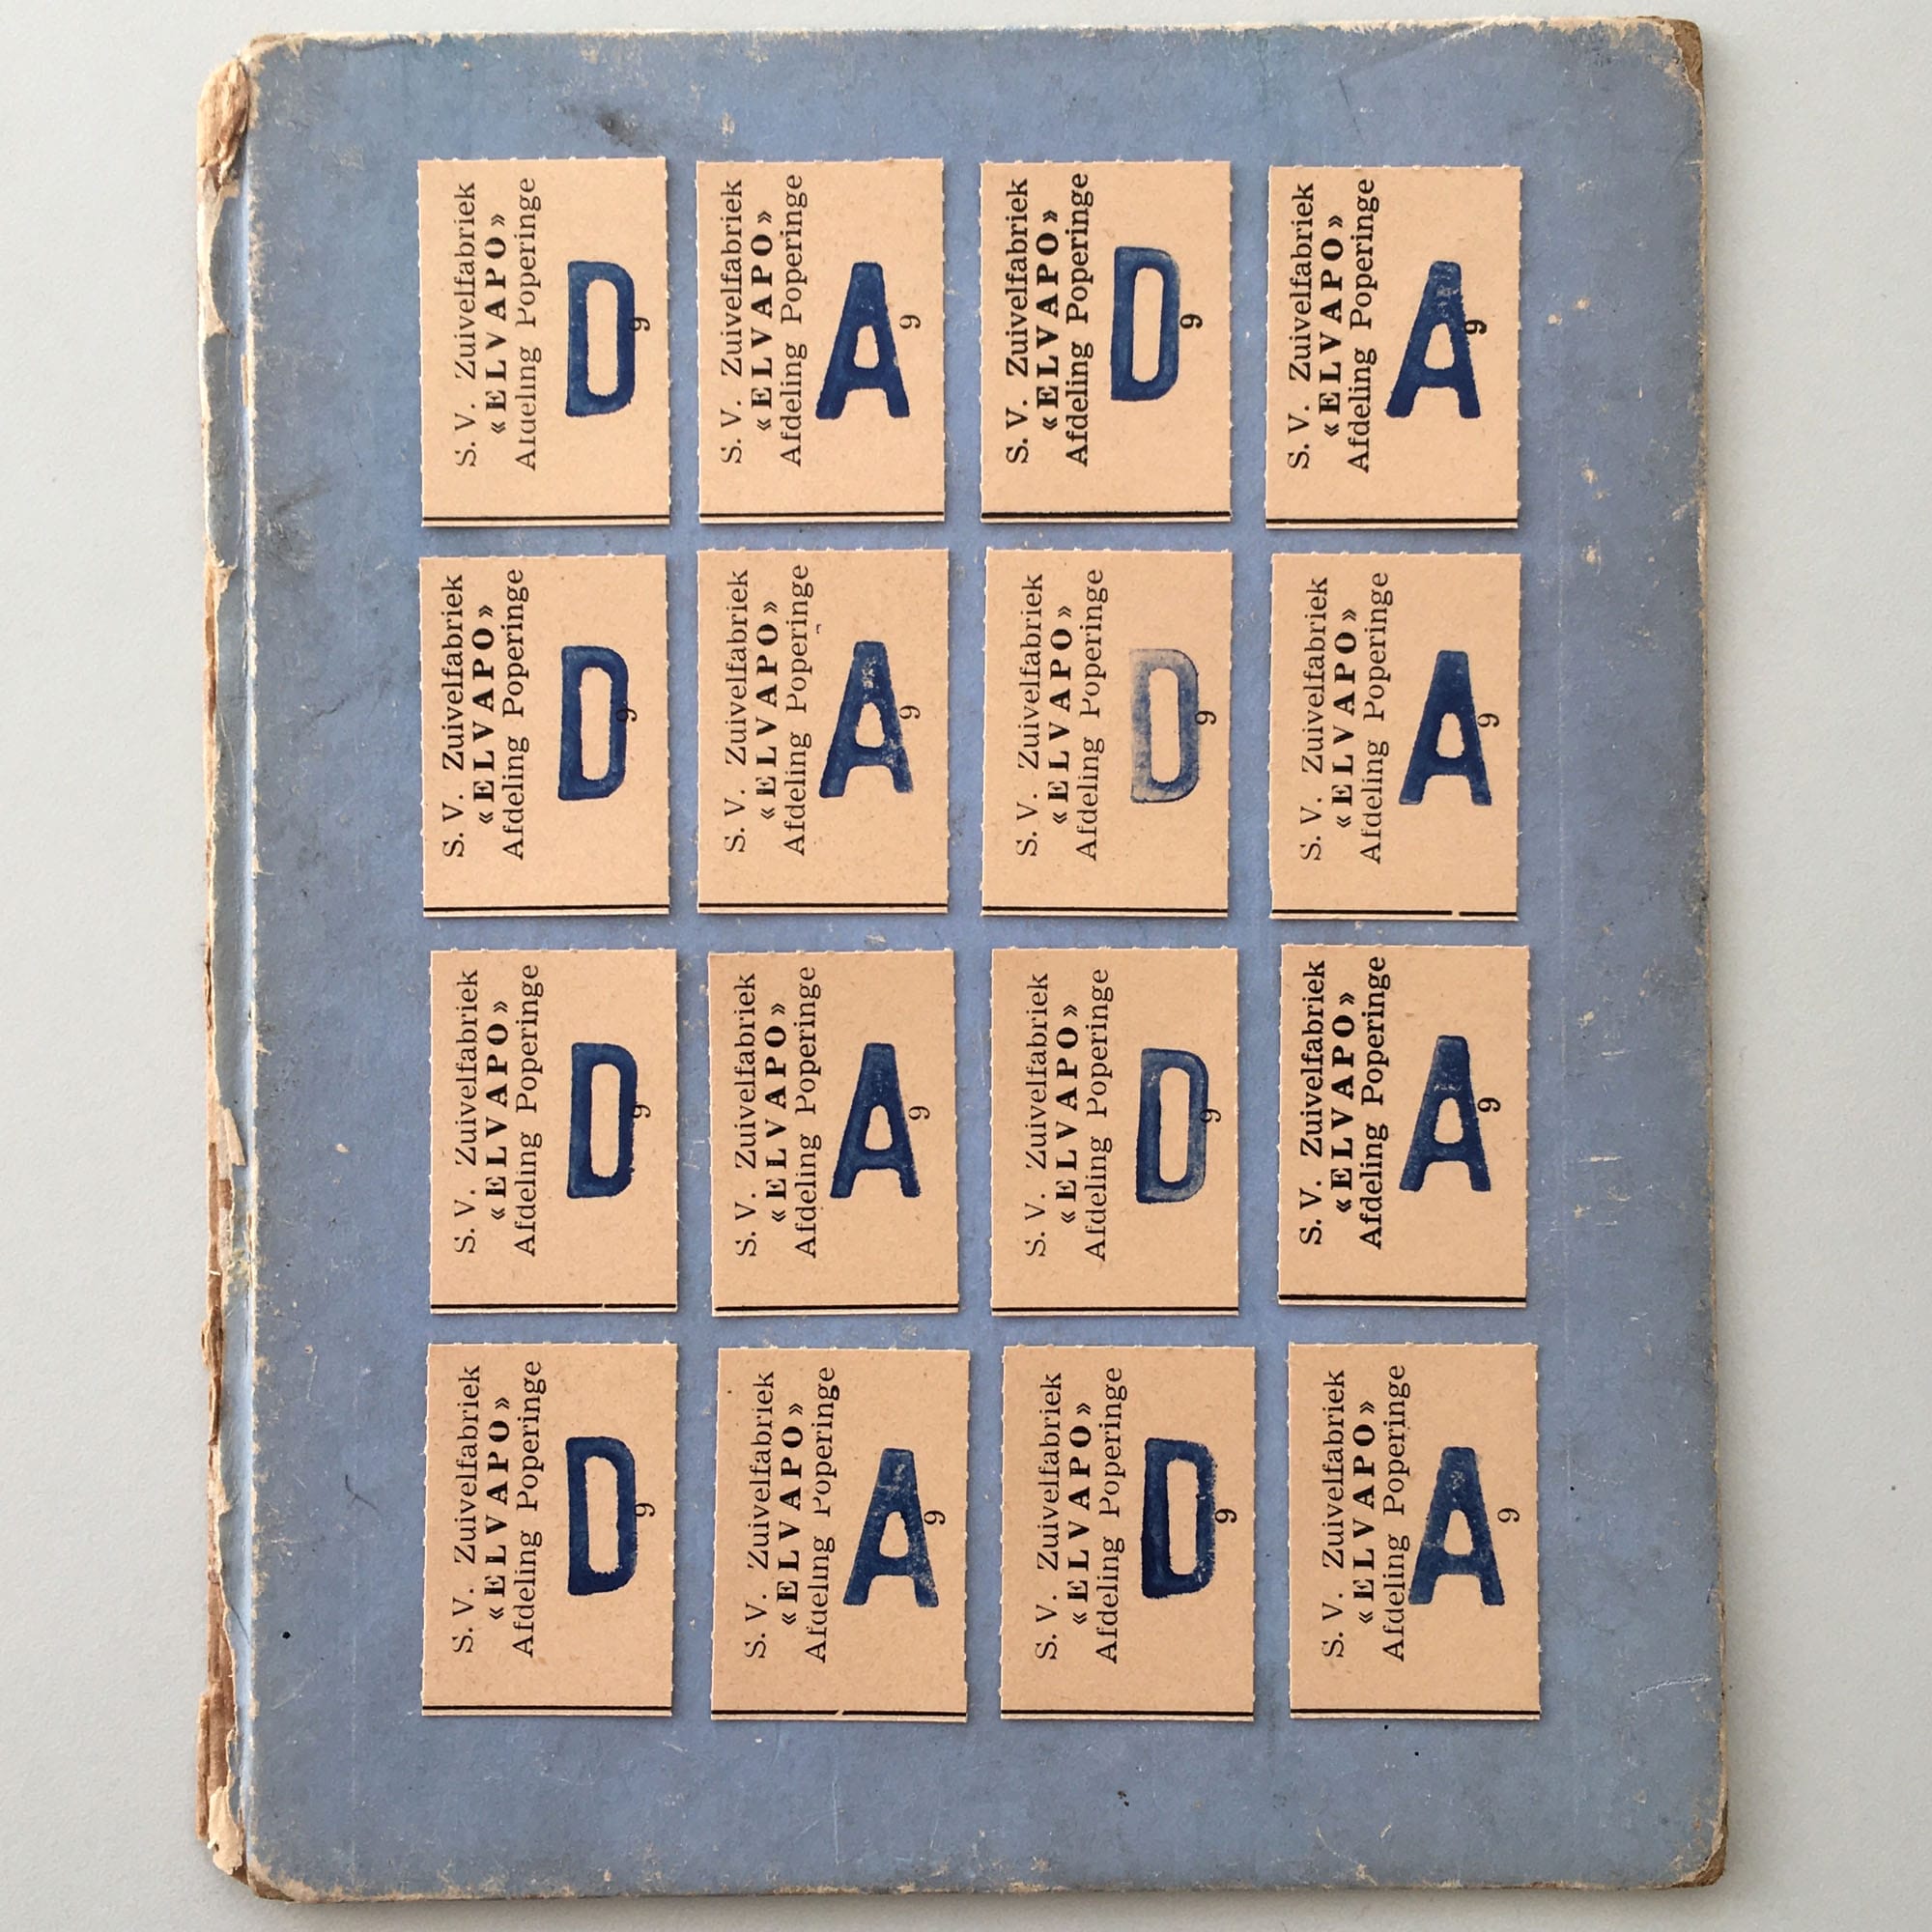 old train tickets arranged in a grid with stamps of the letters D and A.